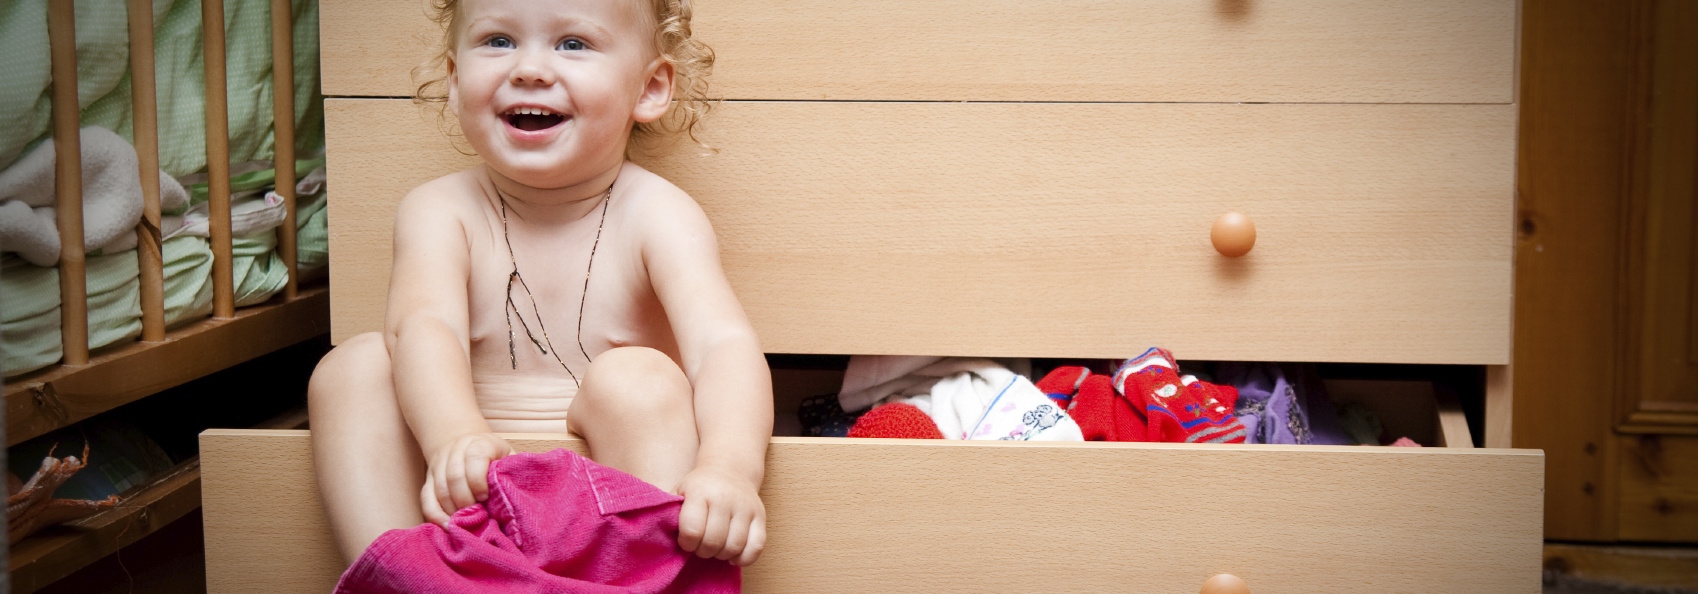 Your Baby's Building Independence}